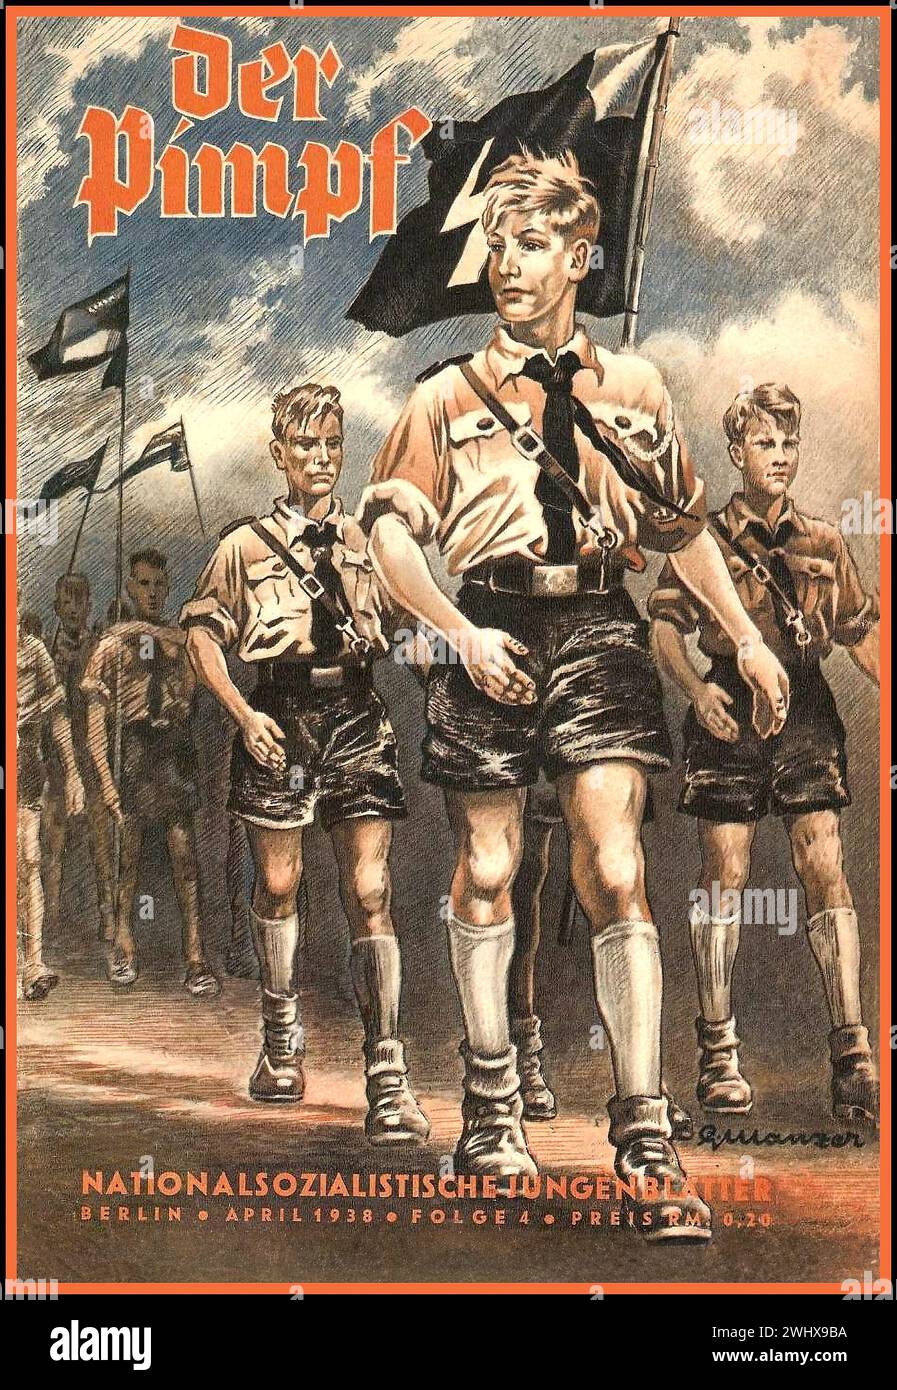 Hitler Youth Propaganda magazine cover 1938 Boys Youths marching carrying Nazi flags  'Der Pimpf'  was the Nazi magazine for boys, particularly those in the Deutsches Jungvolk, with adventure and propaganda. It first appeared in 1935 as Morgen, changing its name to Der Pimpf in 1937; its publication ceased in July, 1944. It included adventures of troops of Hitler Youth Hitlerjugend Stock Photo